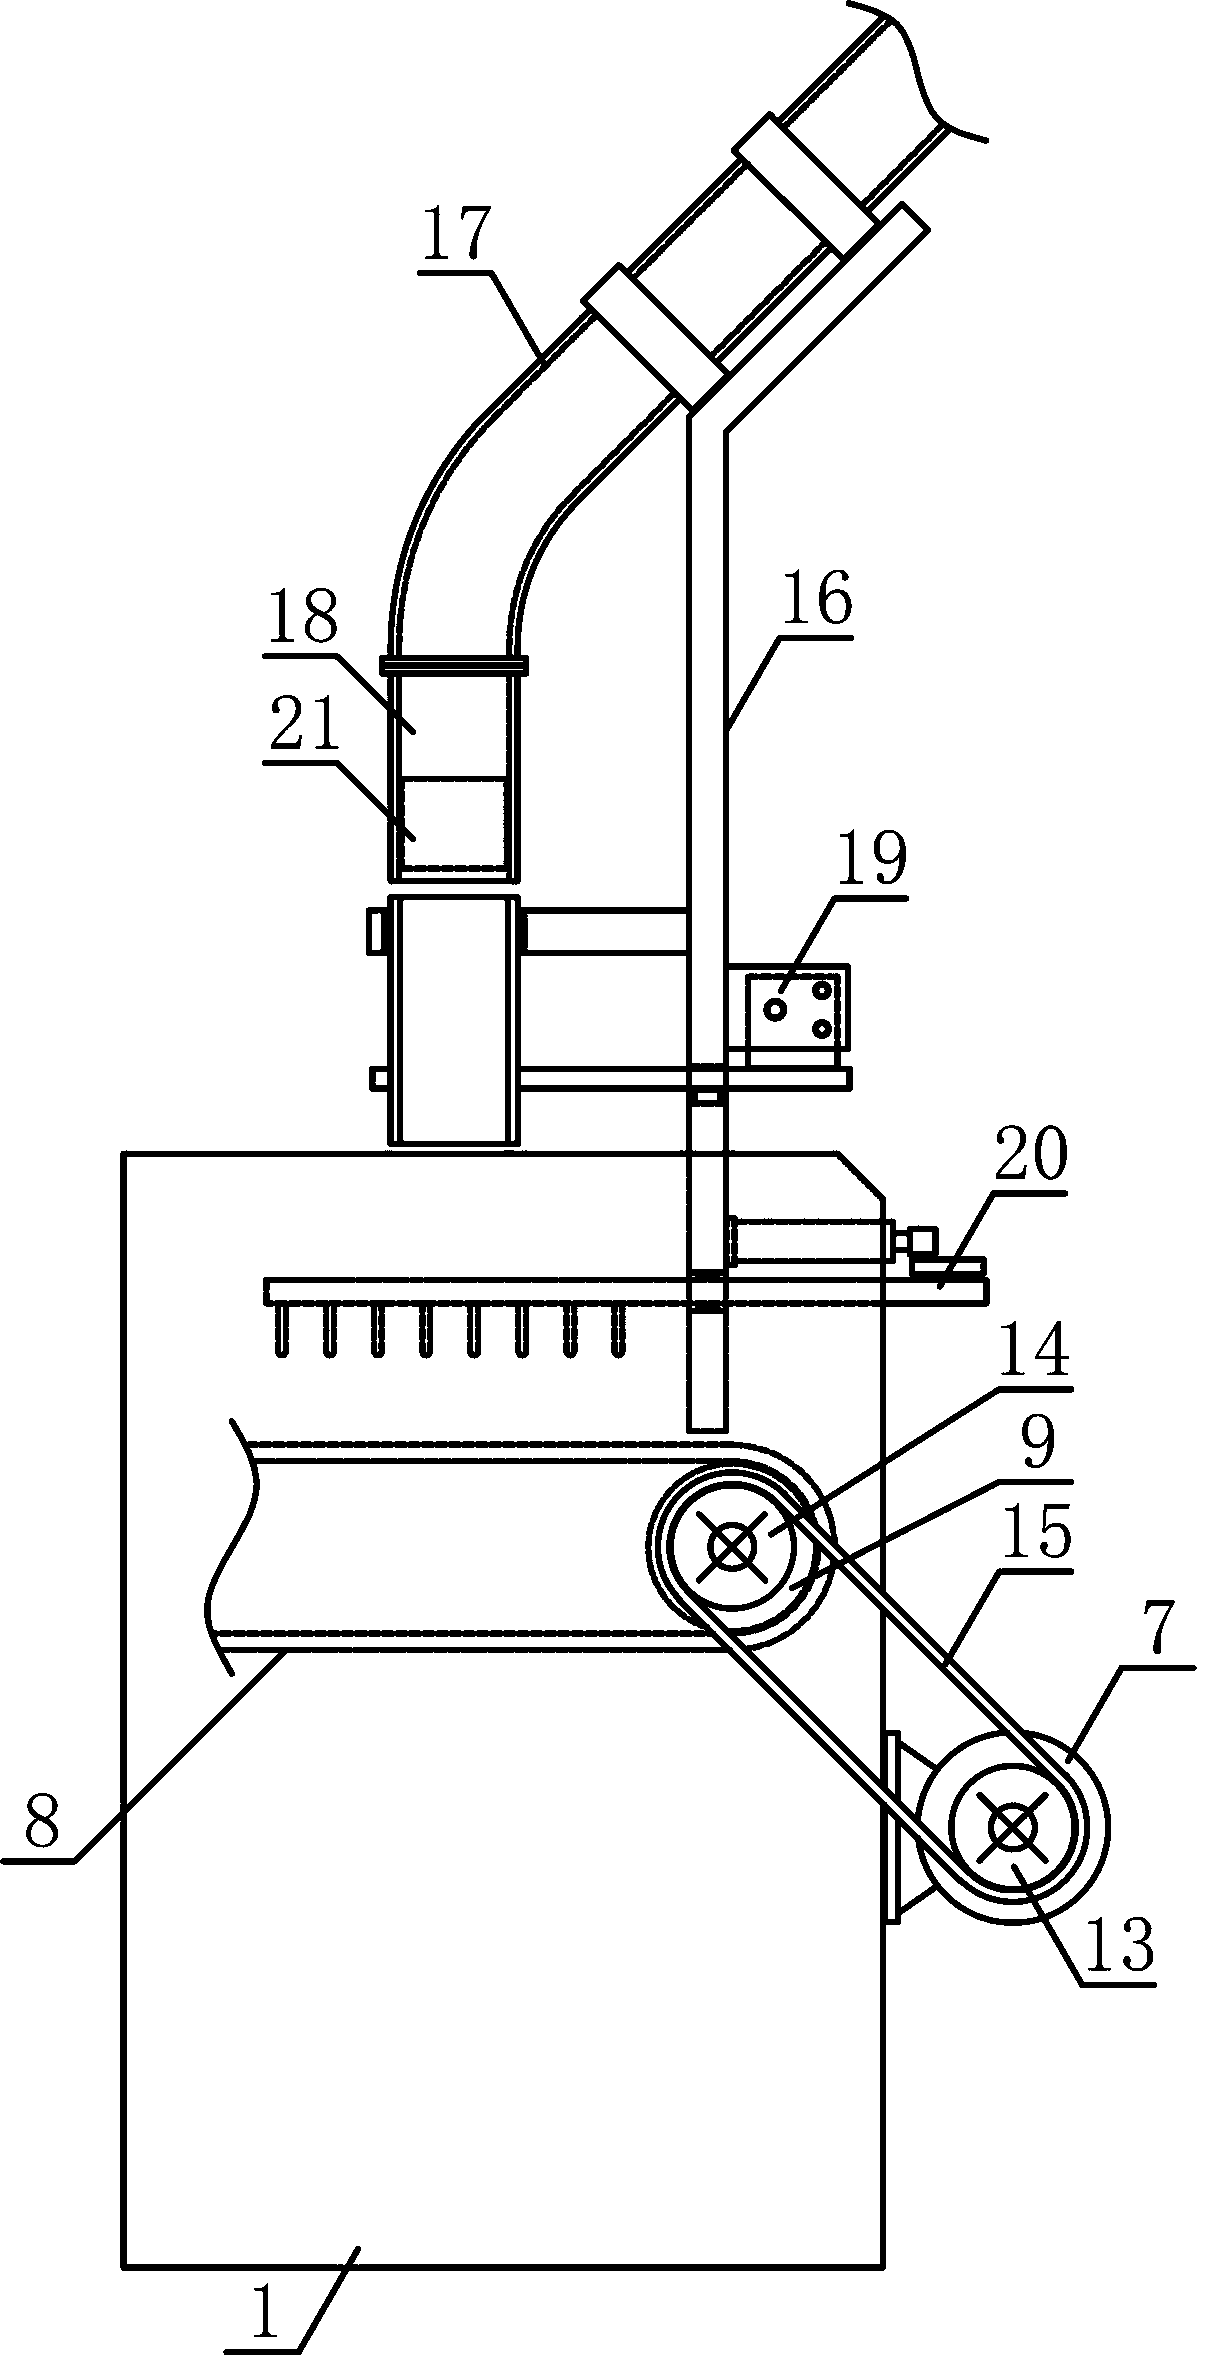 Wool spinning raw material guiding and flat spreading device used for wool top processing